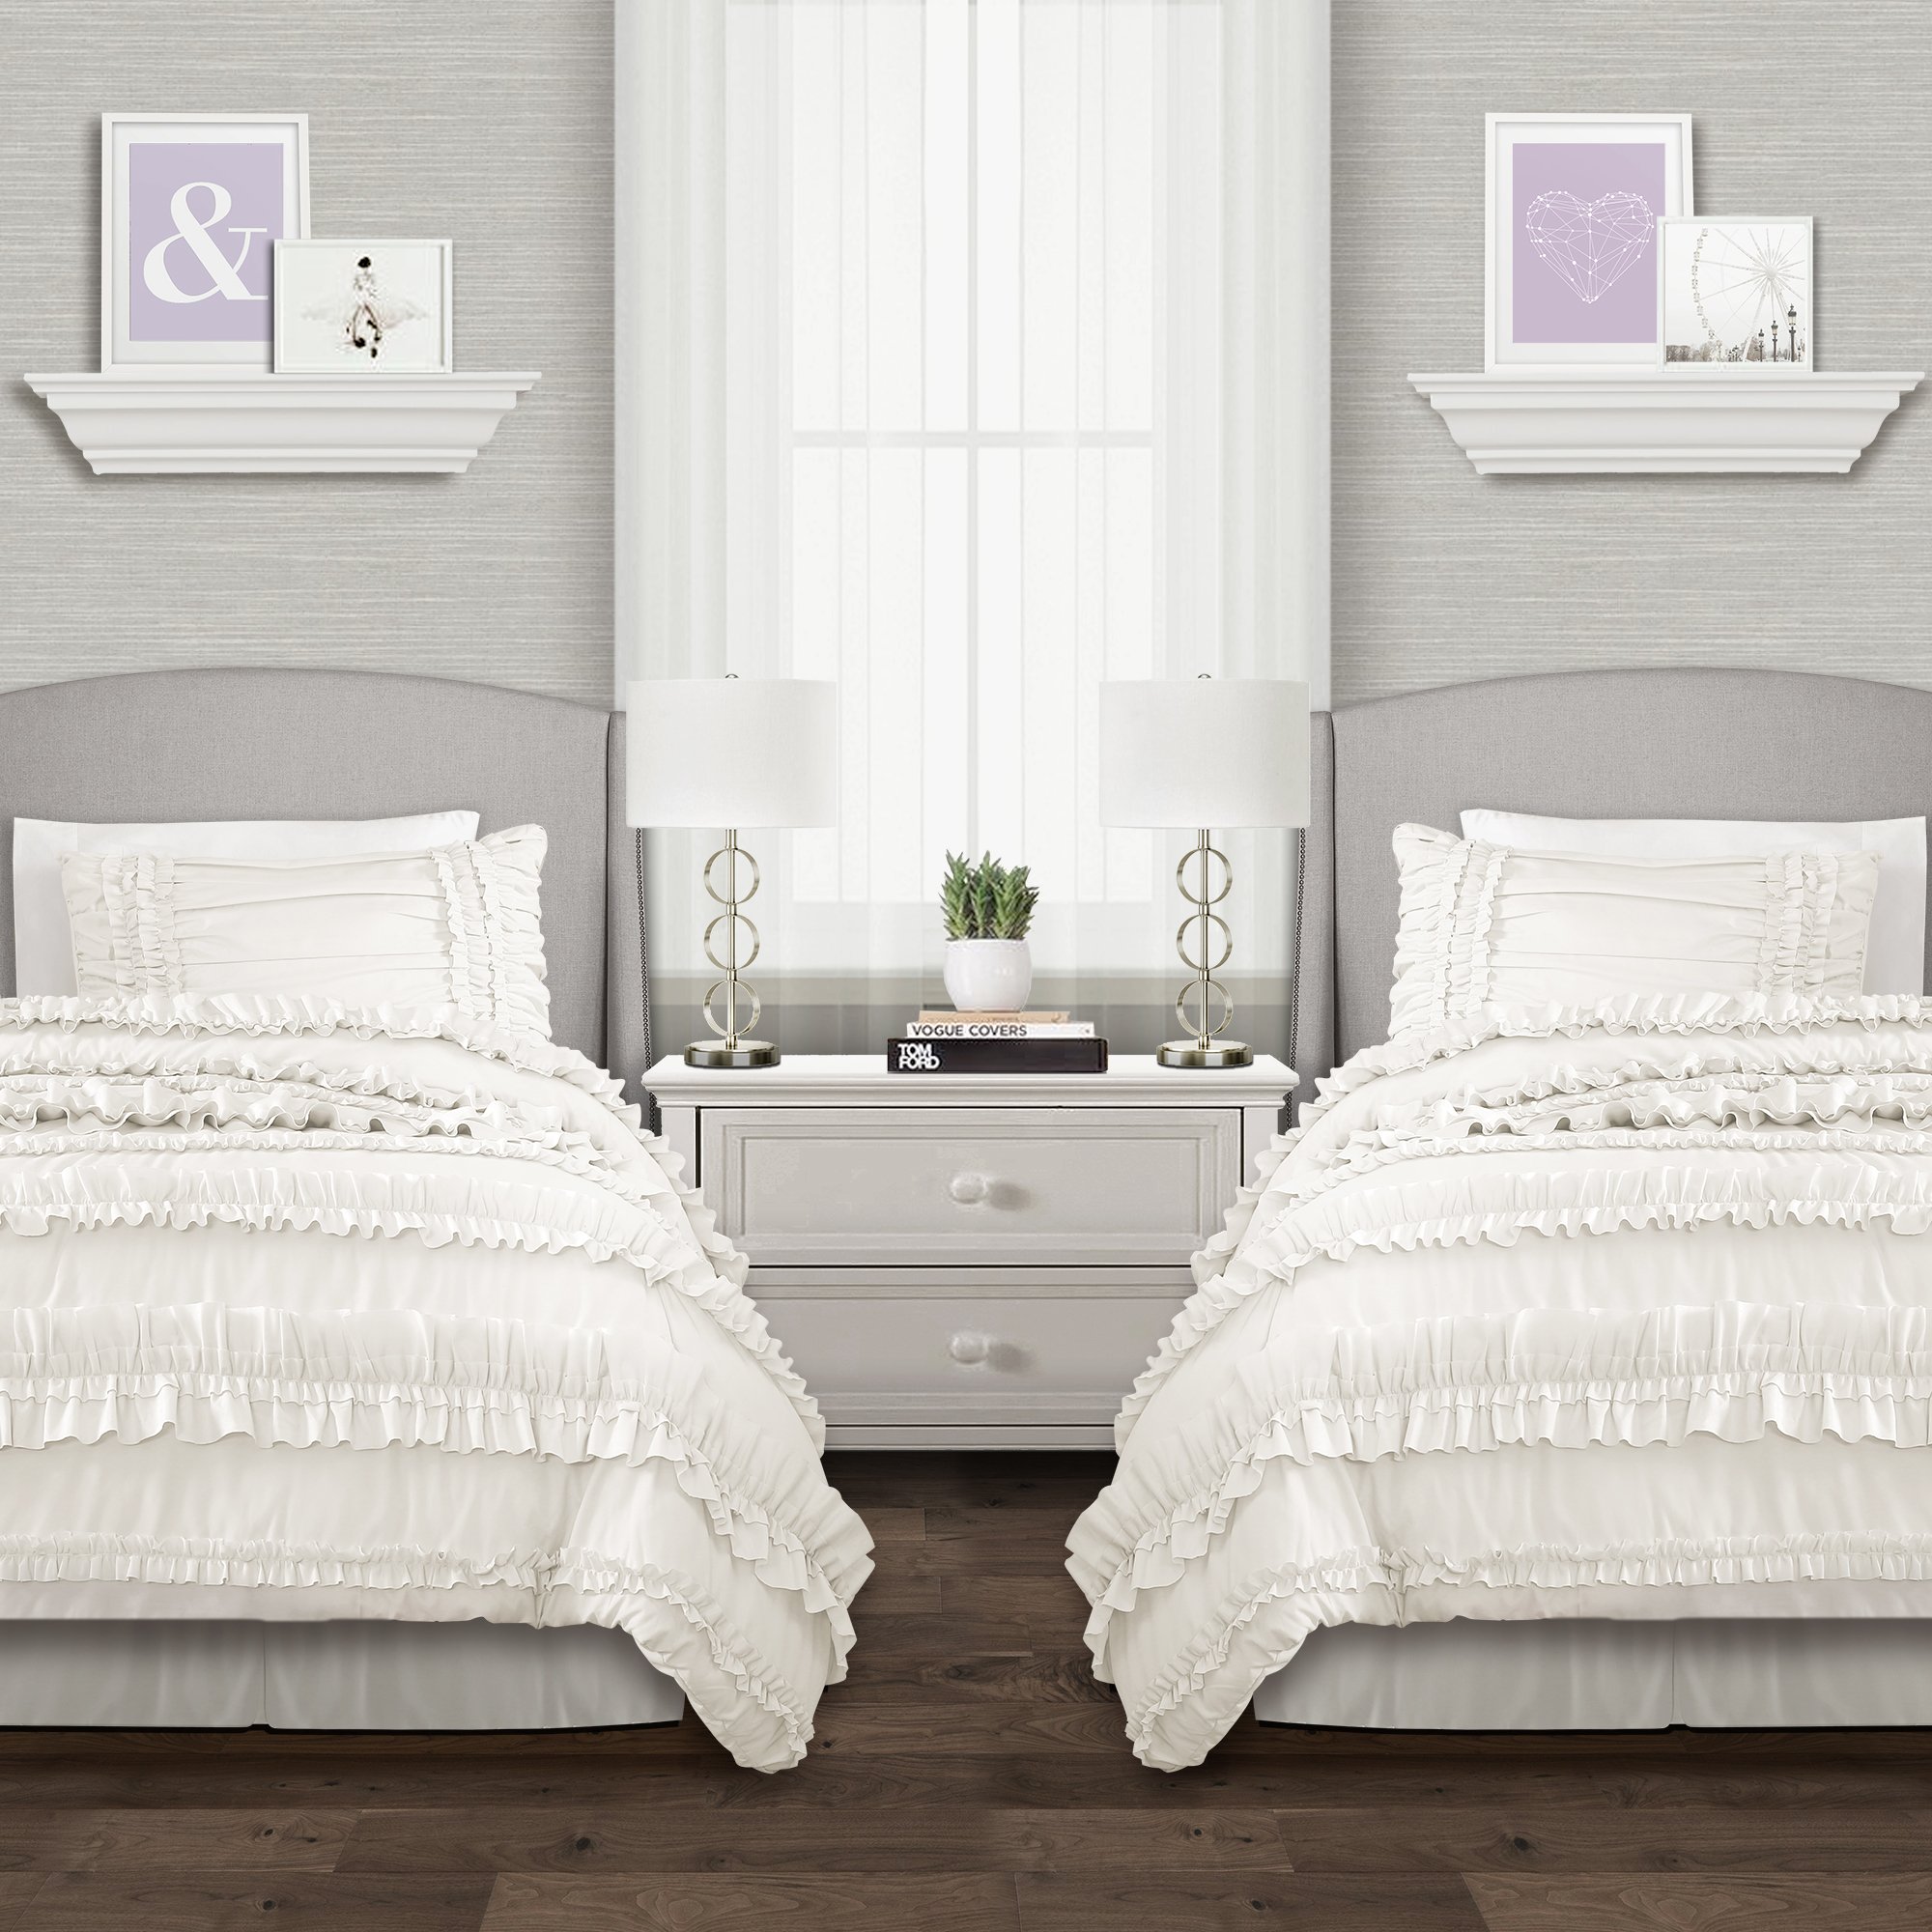 Lush Decor Belle 3 Piece Ruffled Vintage Chic White Comforter Set with Bed Skirt and Pillow Sham, Twin XL